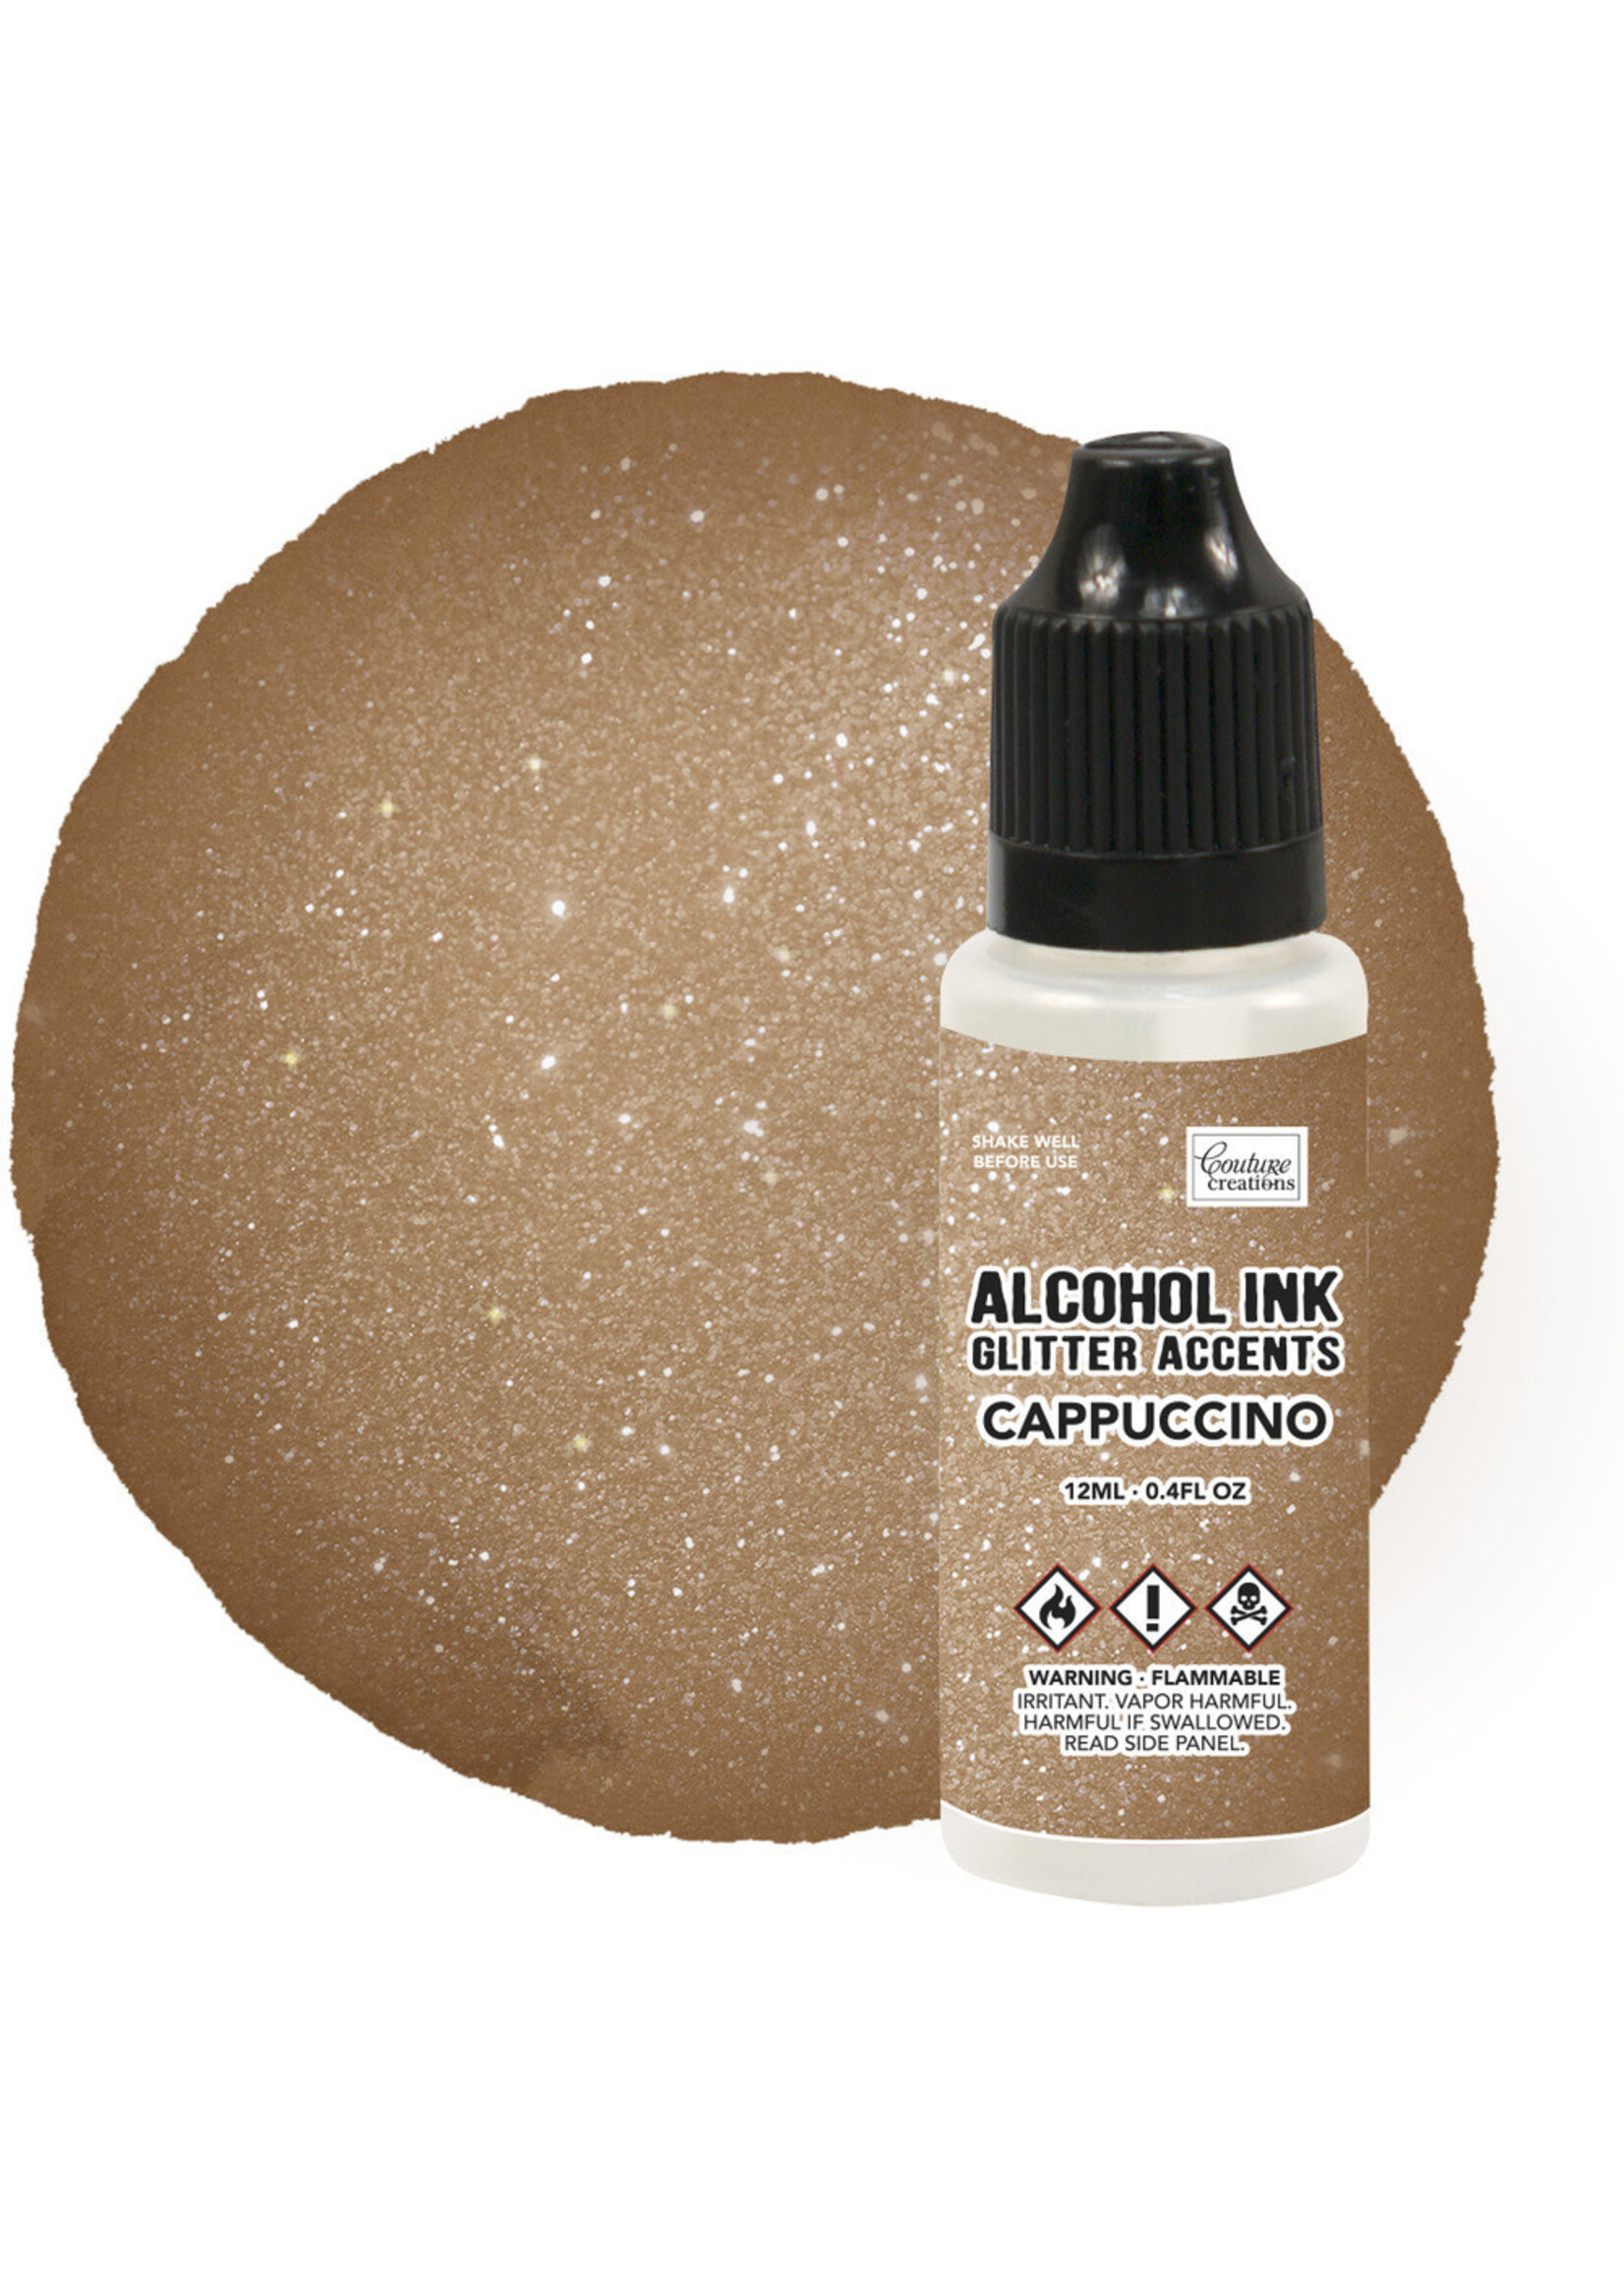 Couture Creations Couture Creations Alcohol Ink Glitter Accents, Cappuccino